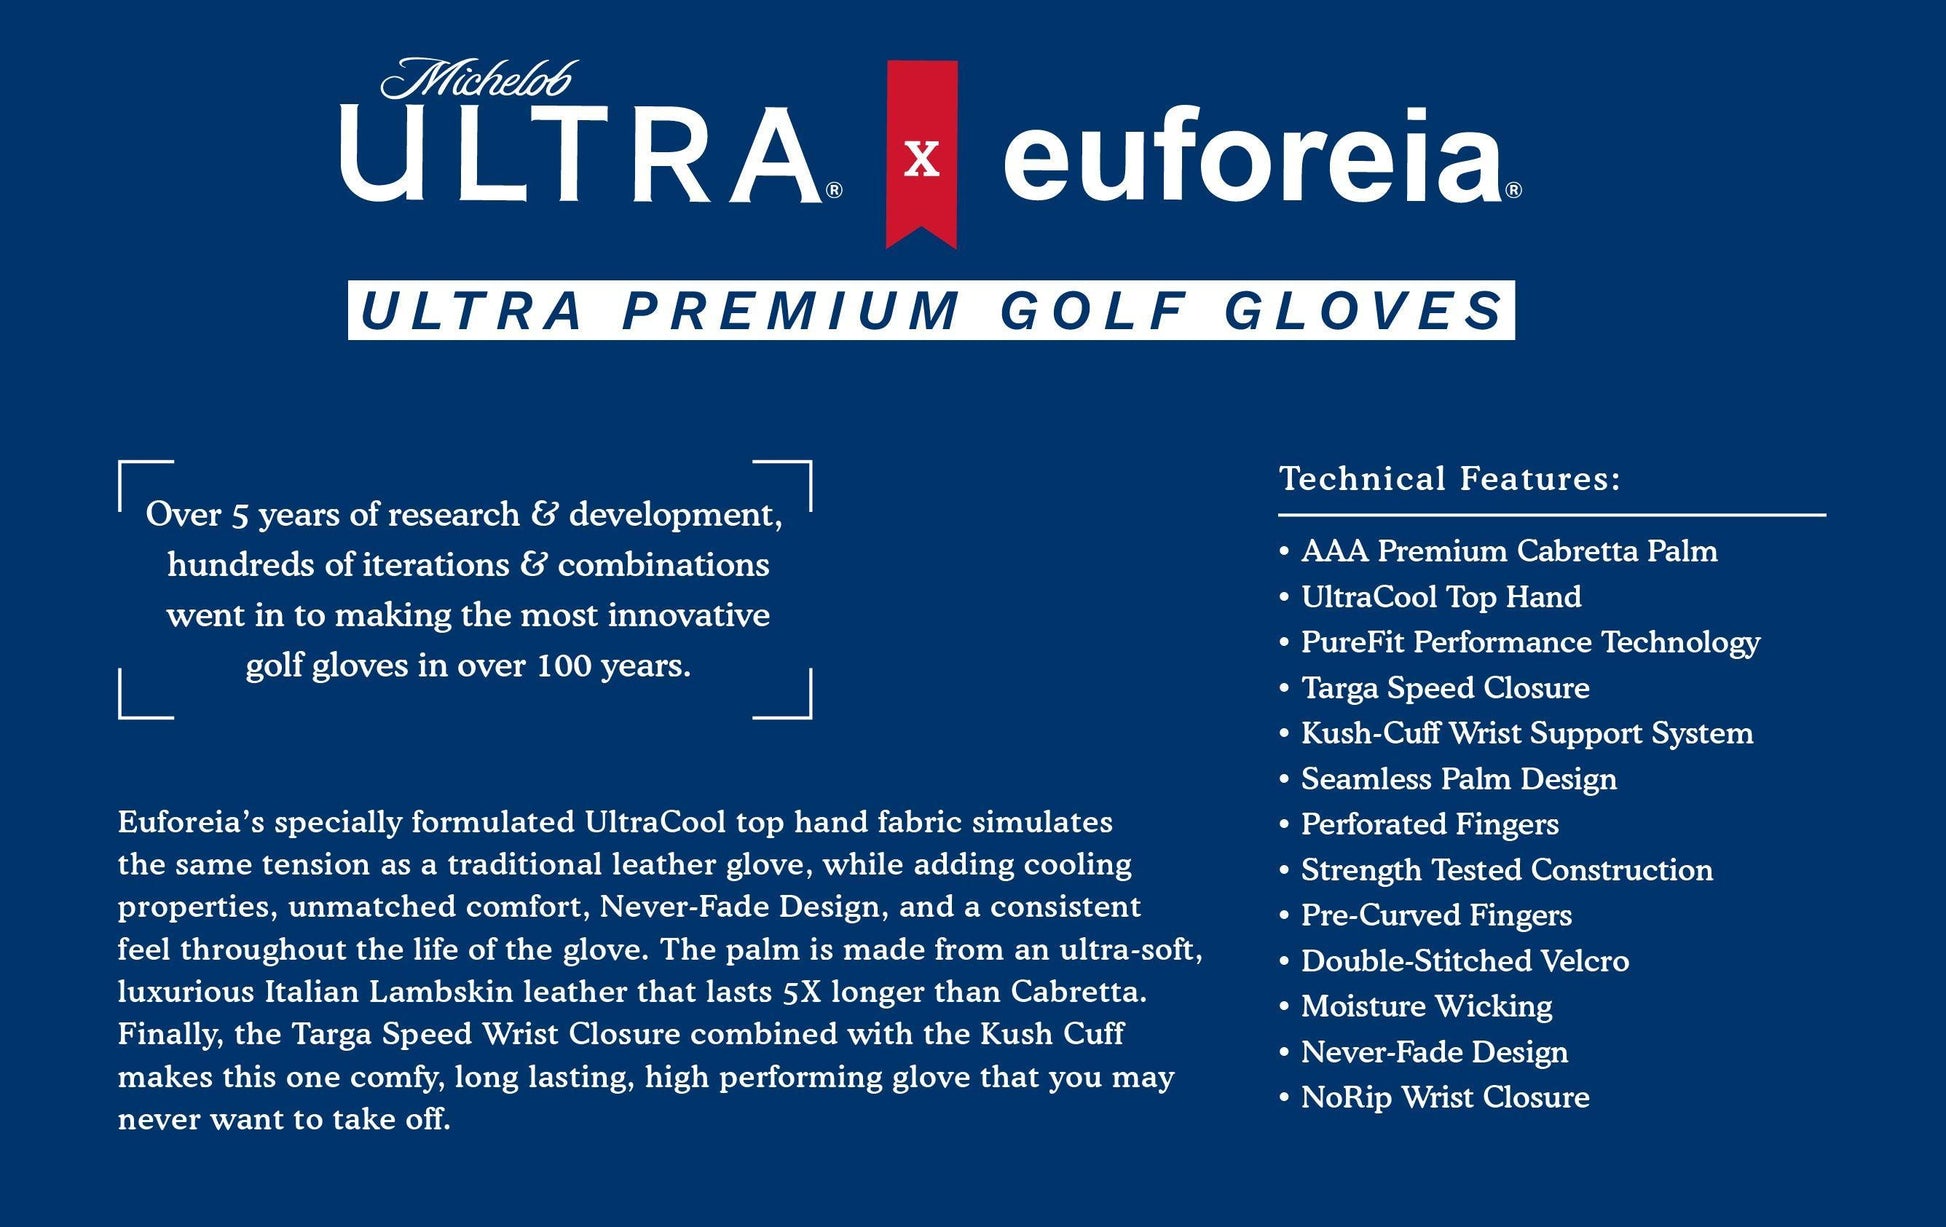 ULTRA x euforeia about information